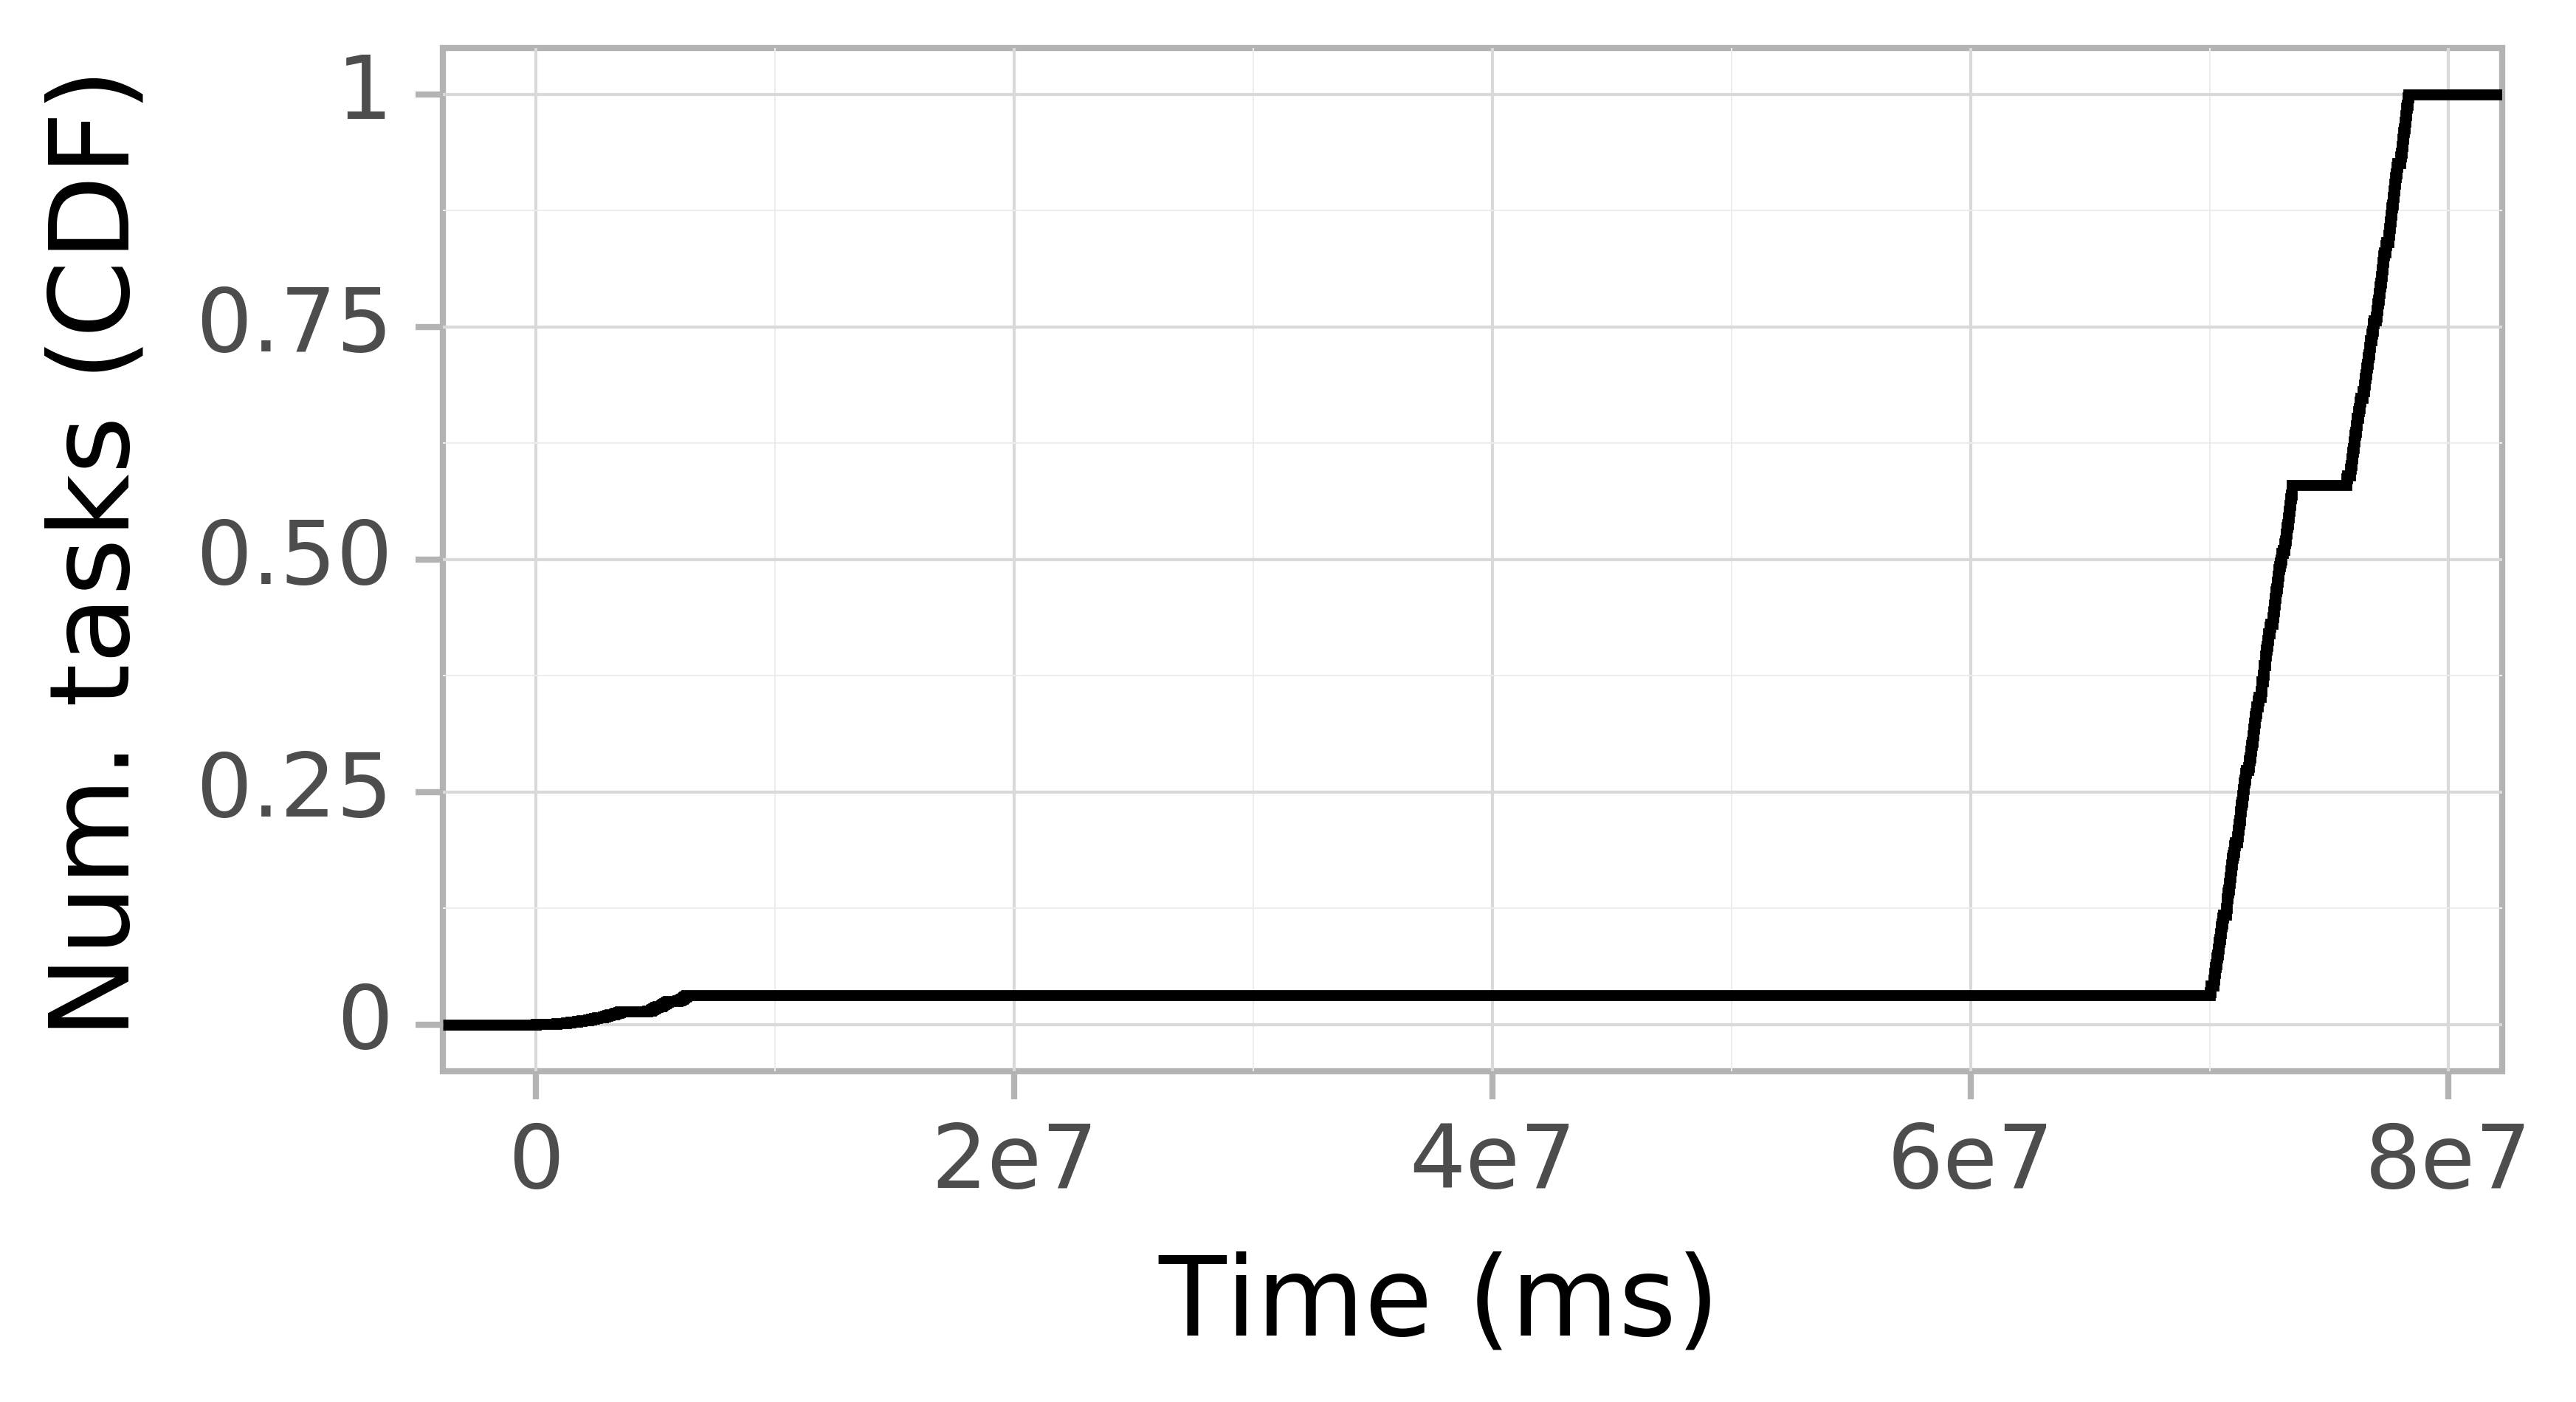 Task arrival CDF graph for the askalon-new_ee26 trace.